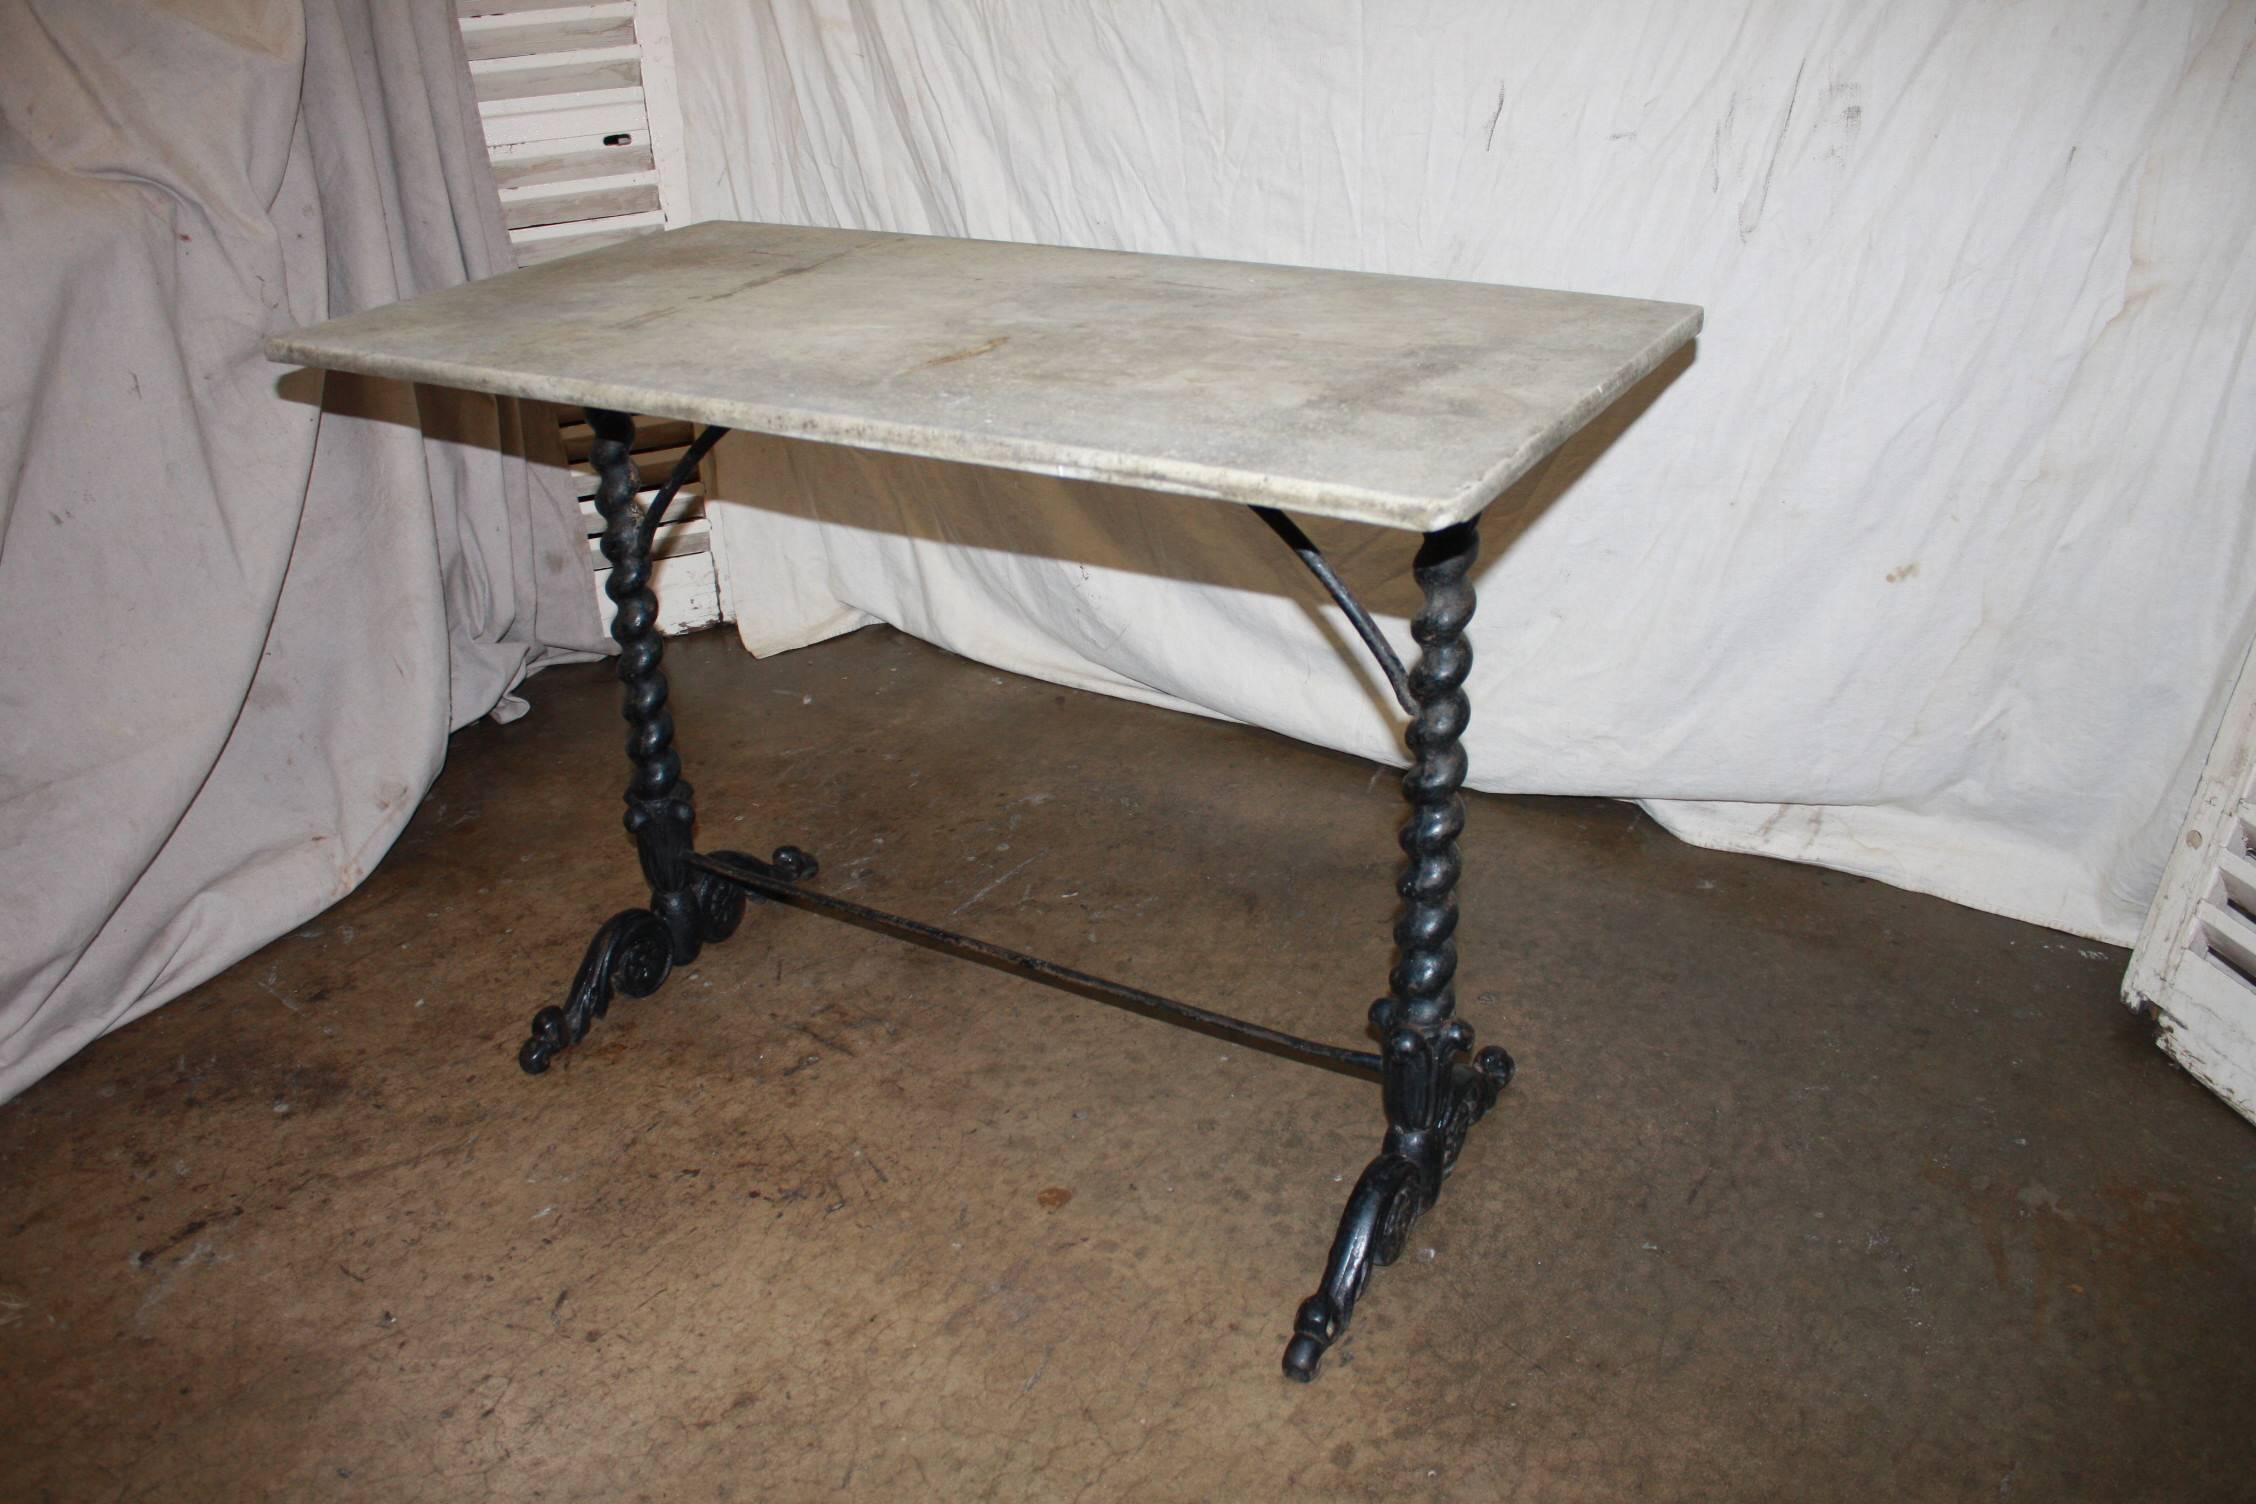 This beautiful garden or bistro table is in cast iron and wear a top made of stone, Louis XIV style.